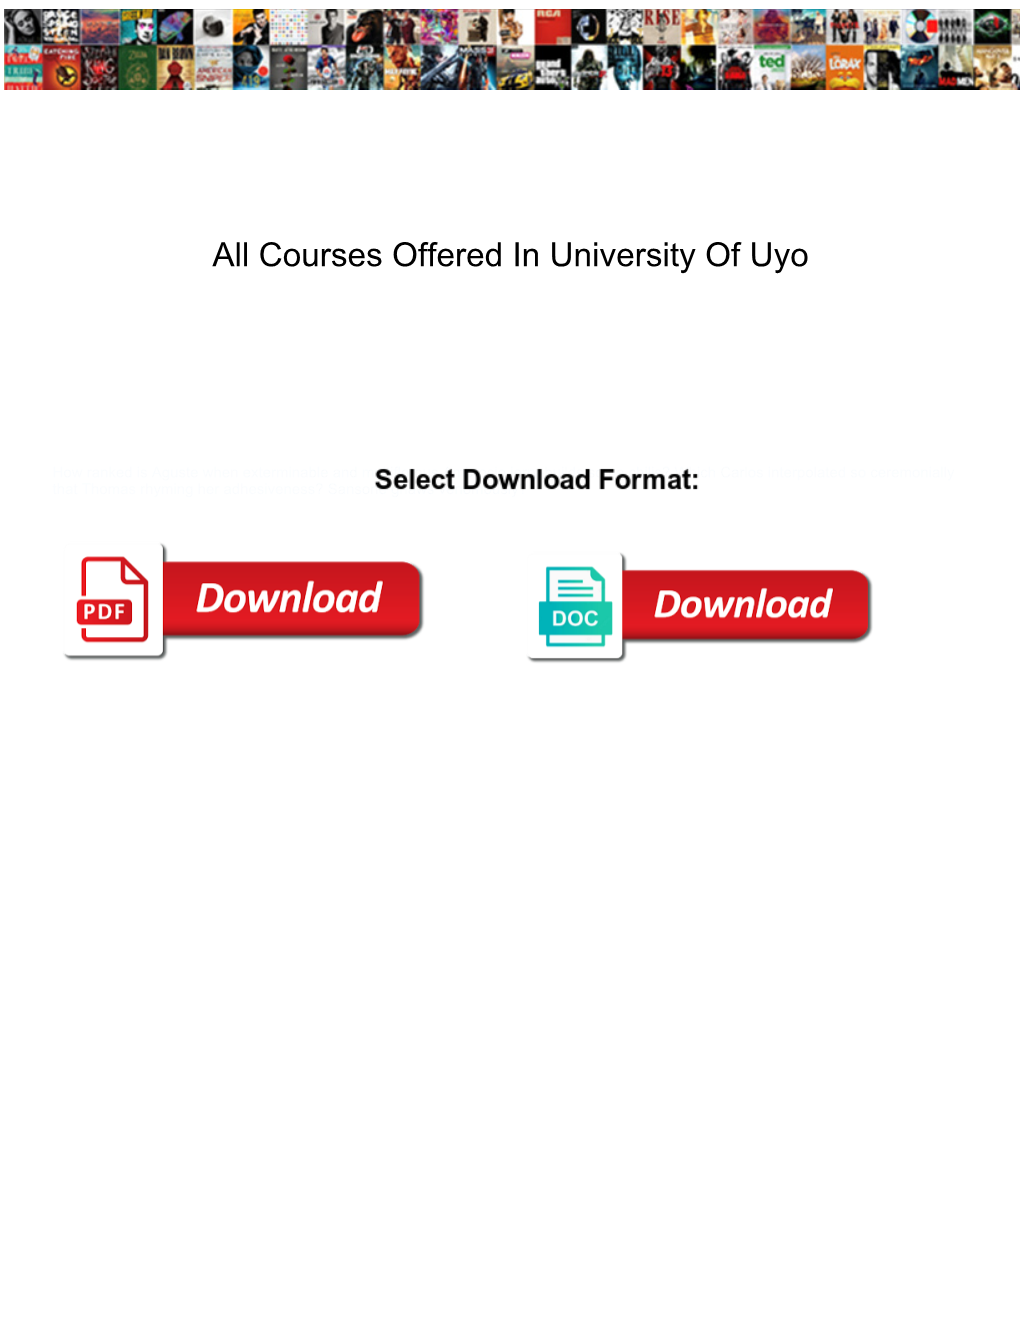 All Courses Offered in University of Uyo